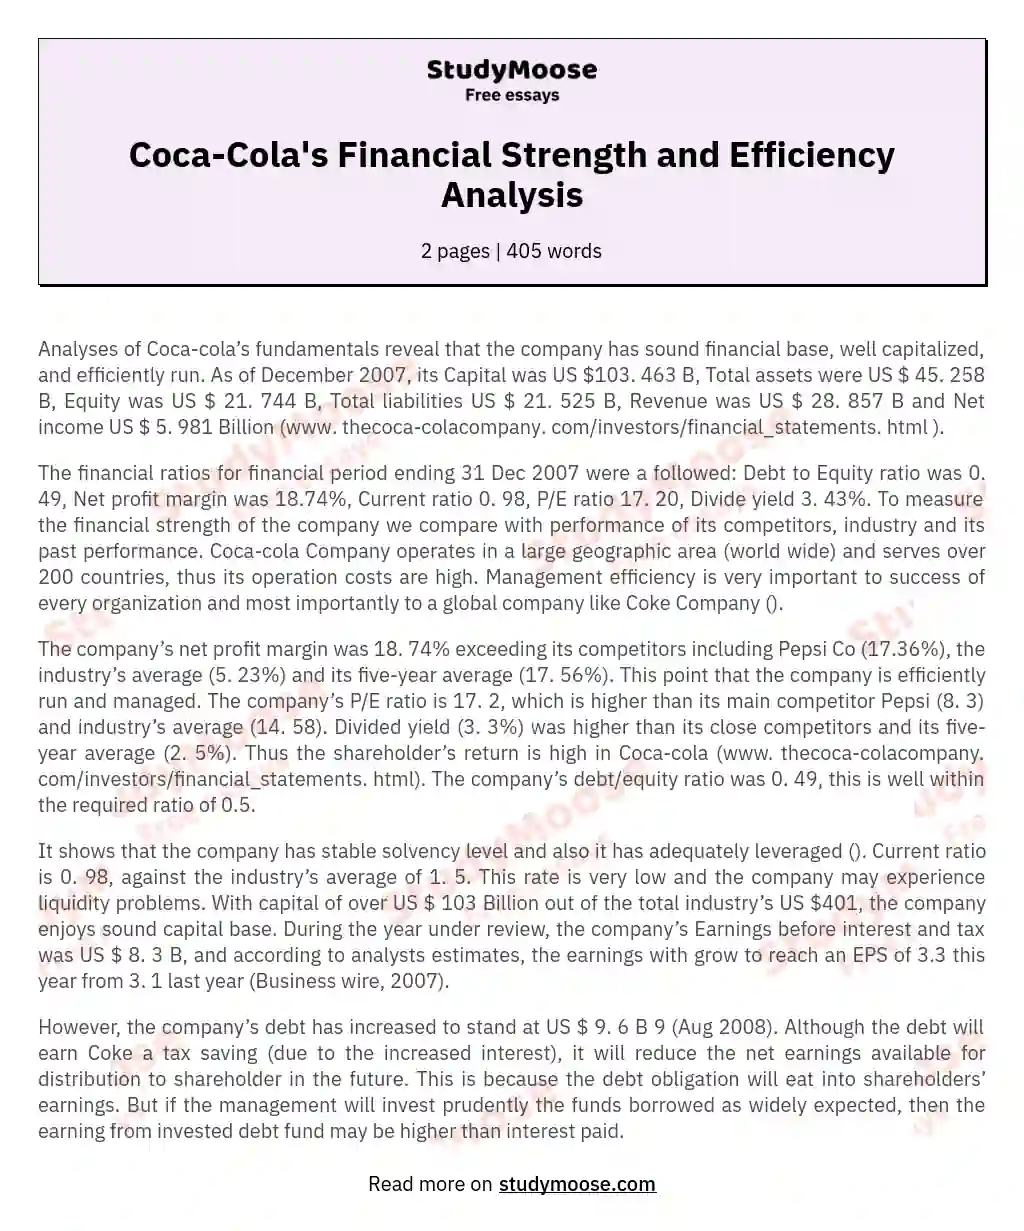 Coca-Cola's Financial Strength and Efficiency Analysis essay